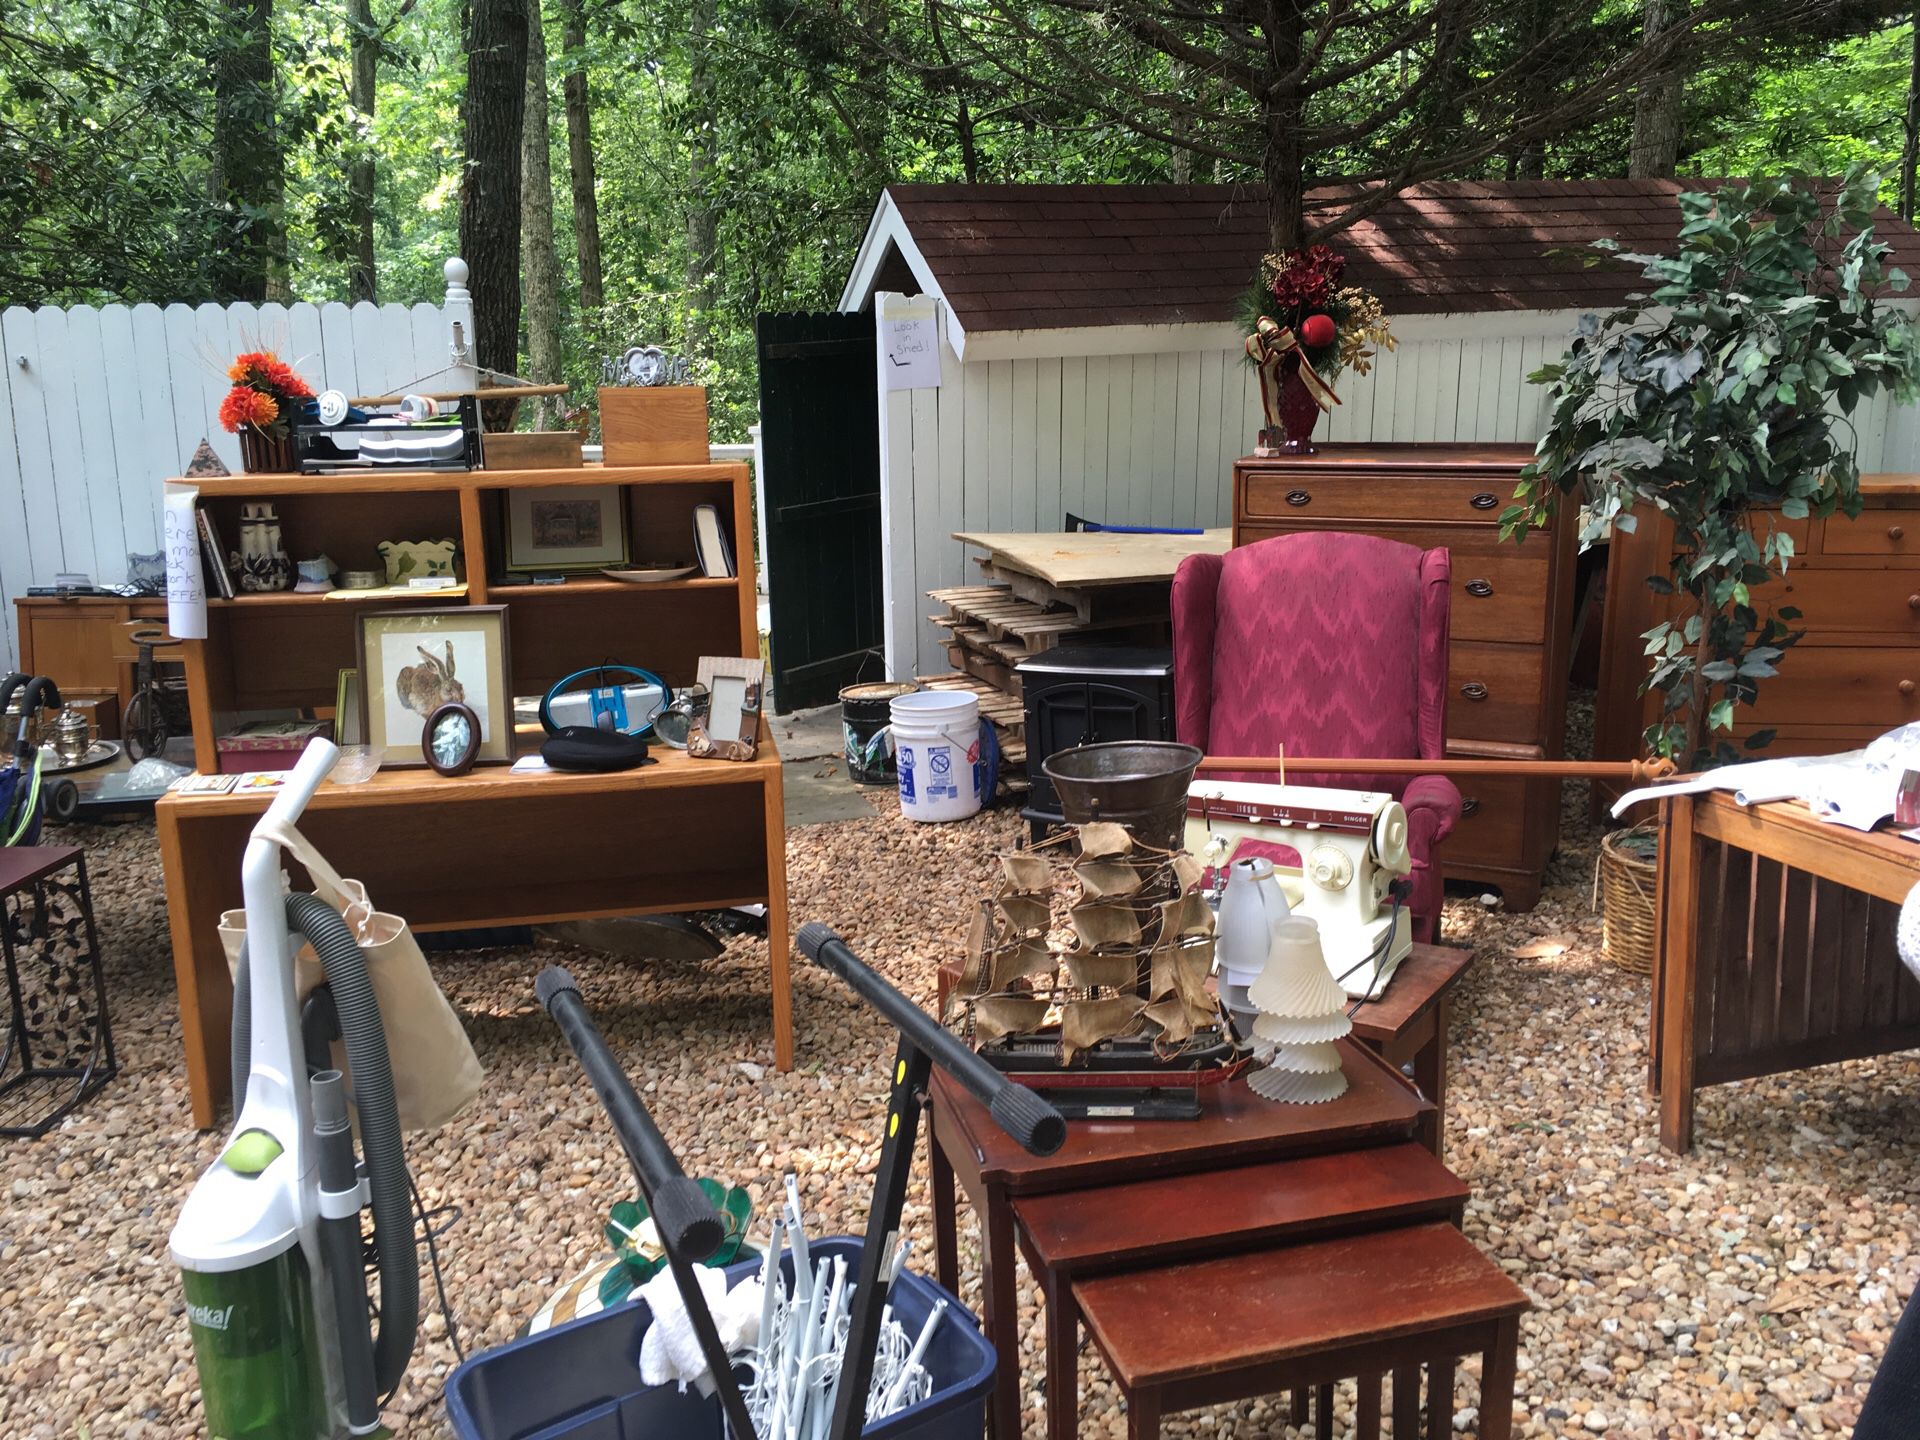 All furniture bargain priced today! Garage sale!